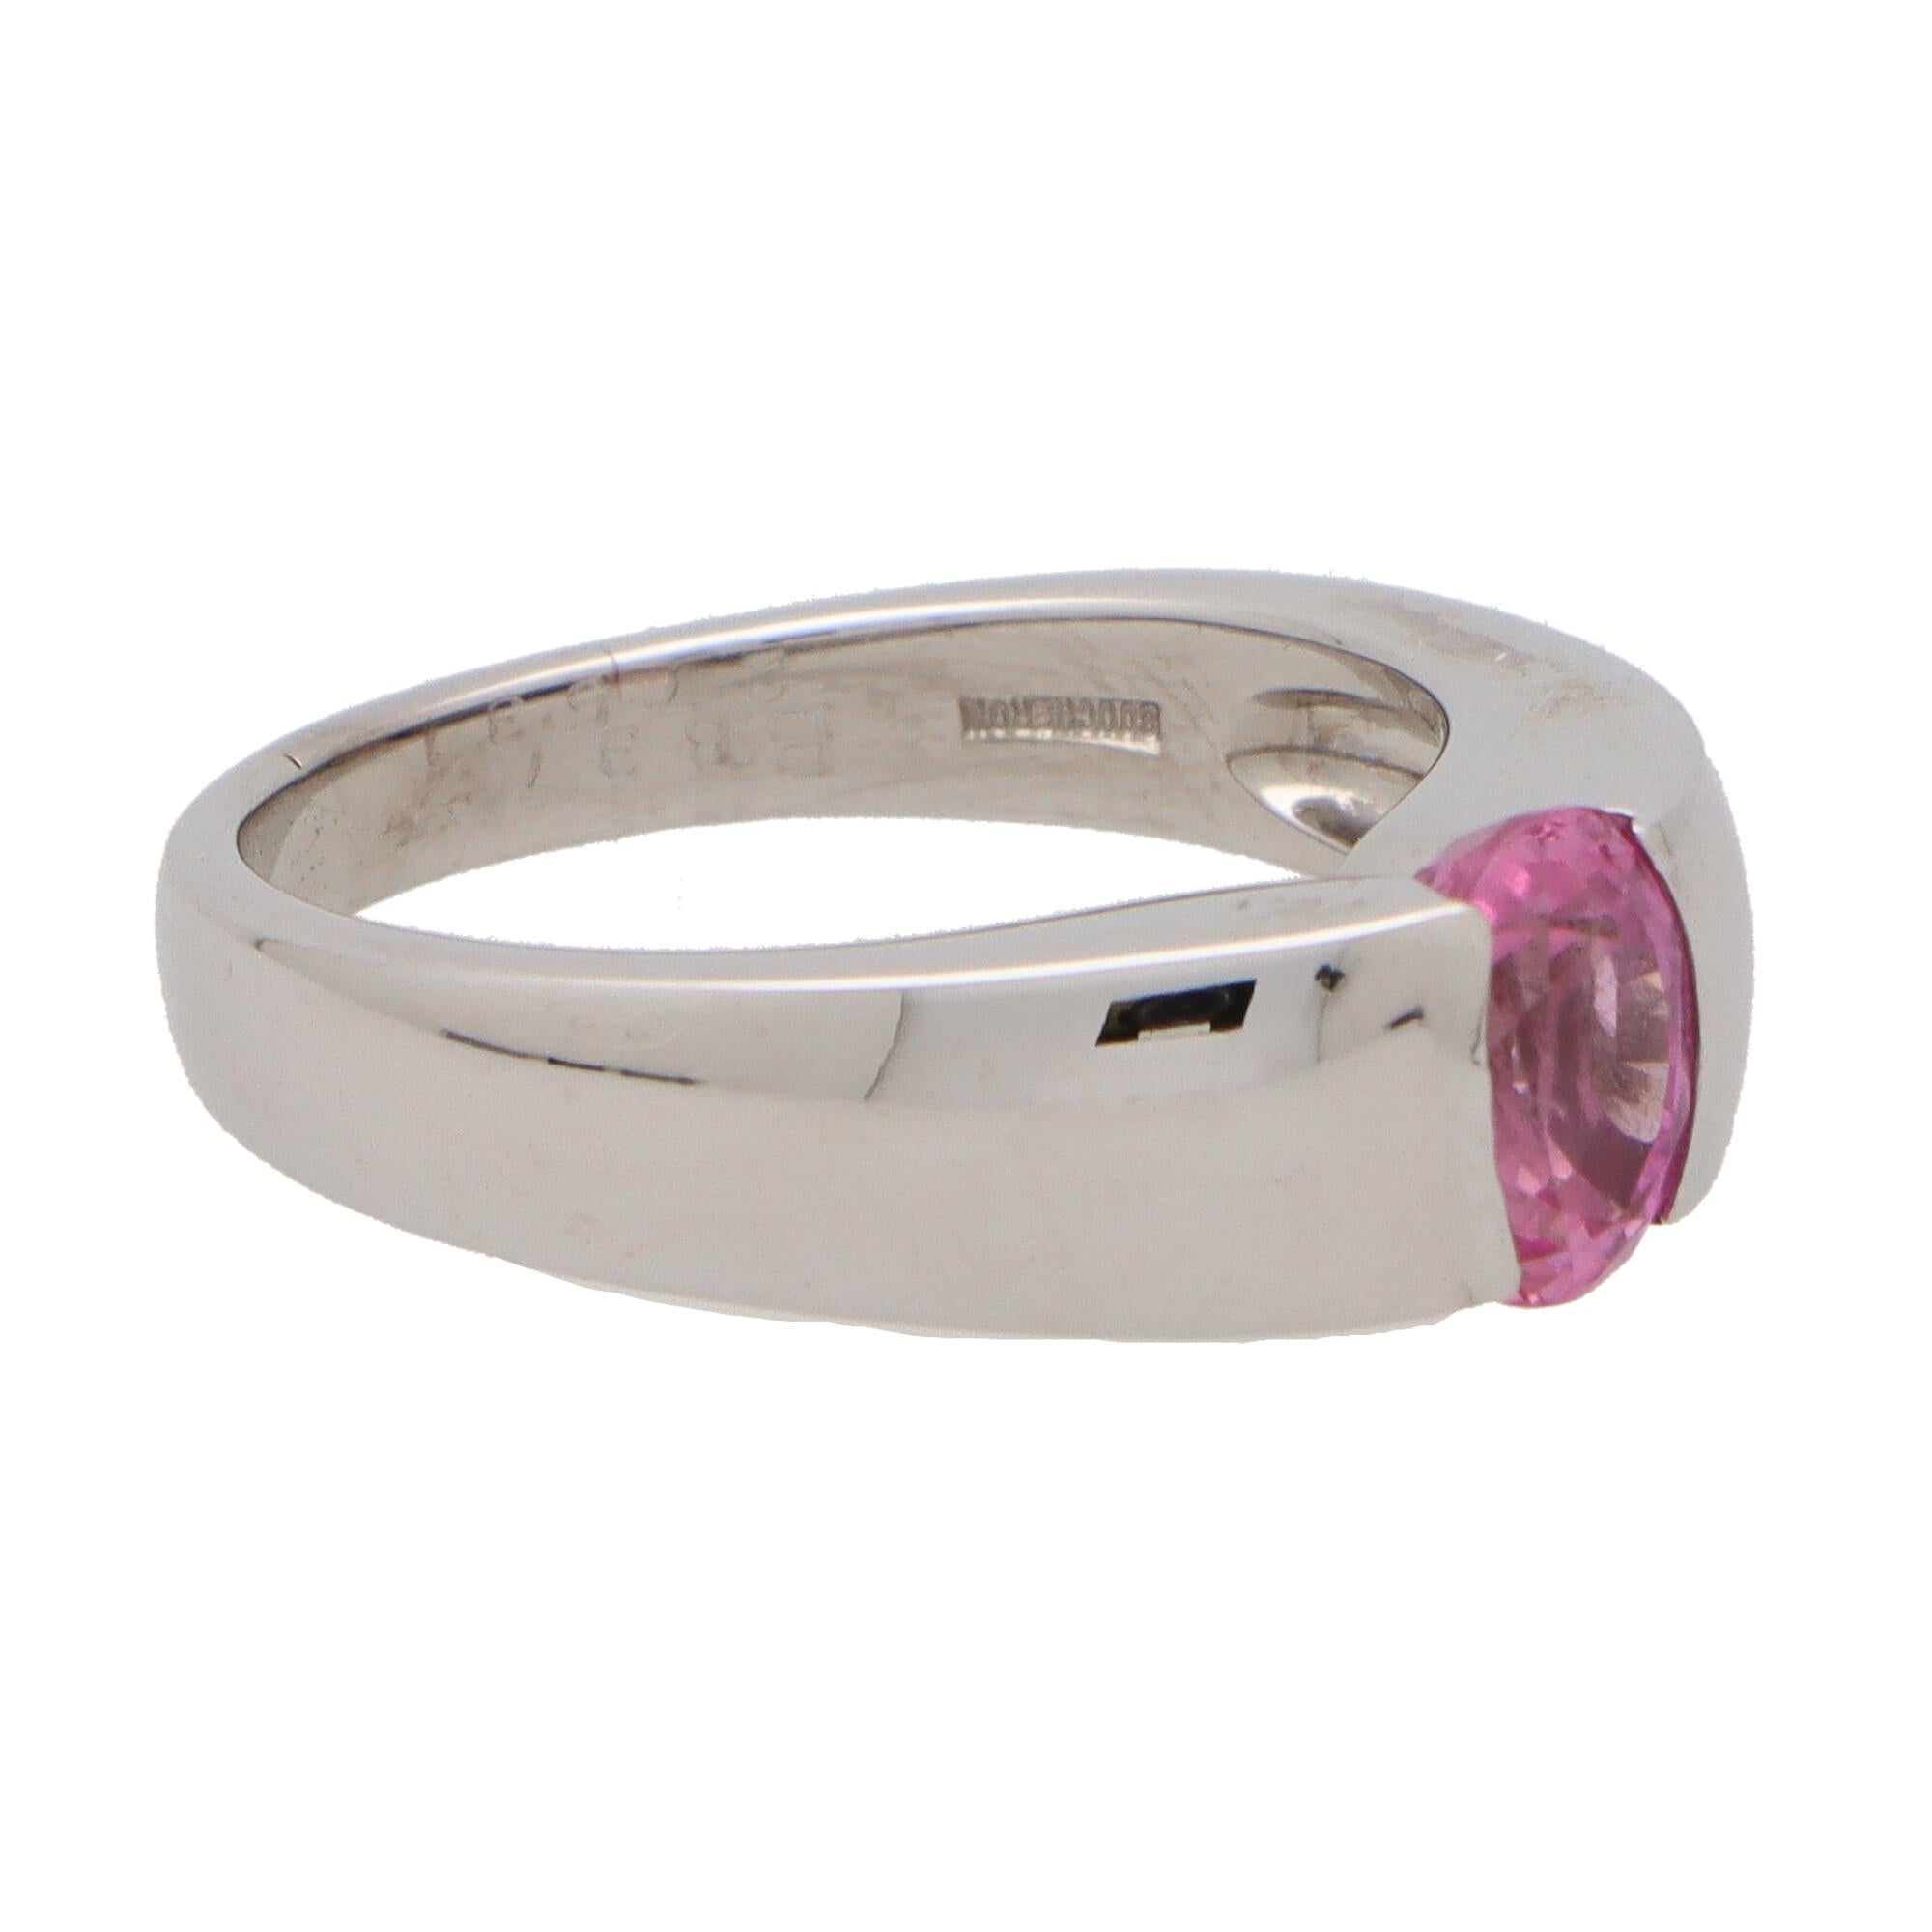 A beautiful vintage Boucheron pink sapphire ring set in 18k white gold.

The ring is solely set with a vibrant oval cut pink sapphire stone which is bezel set securely within a raised white gold mounting.

The design of the ring is simple yet